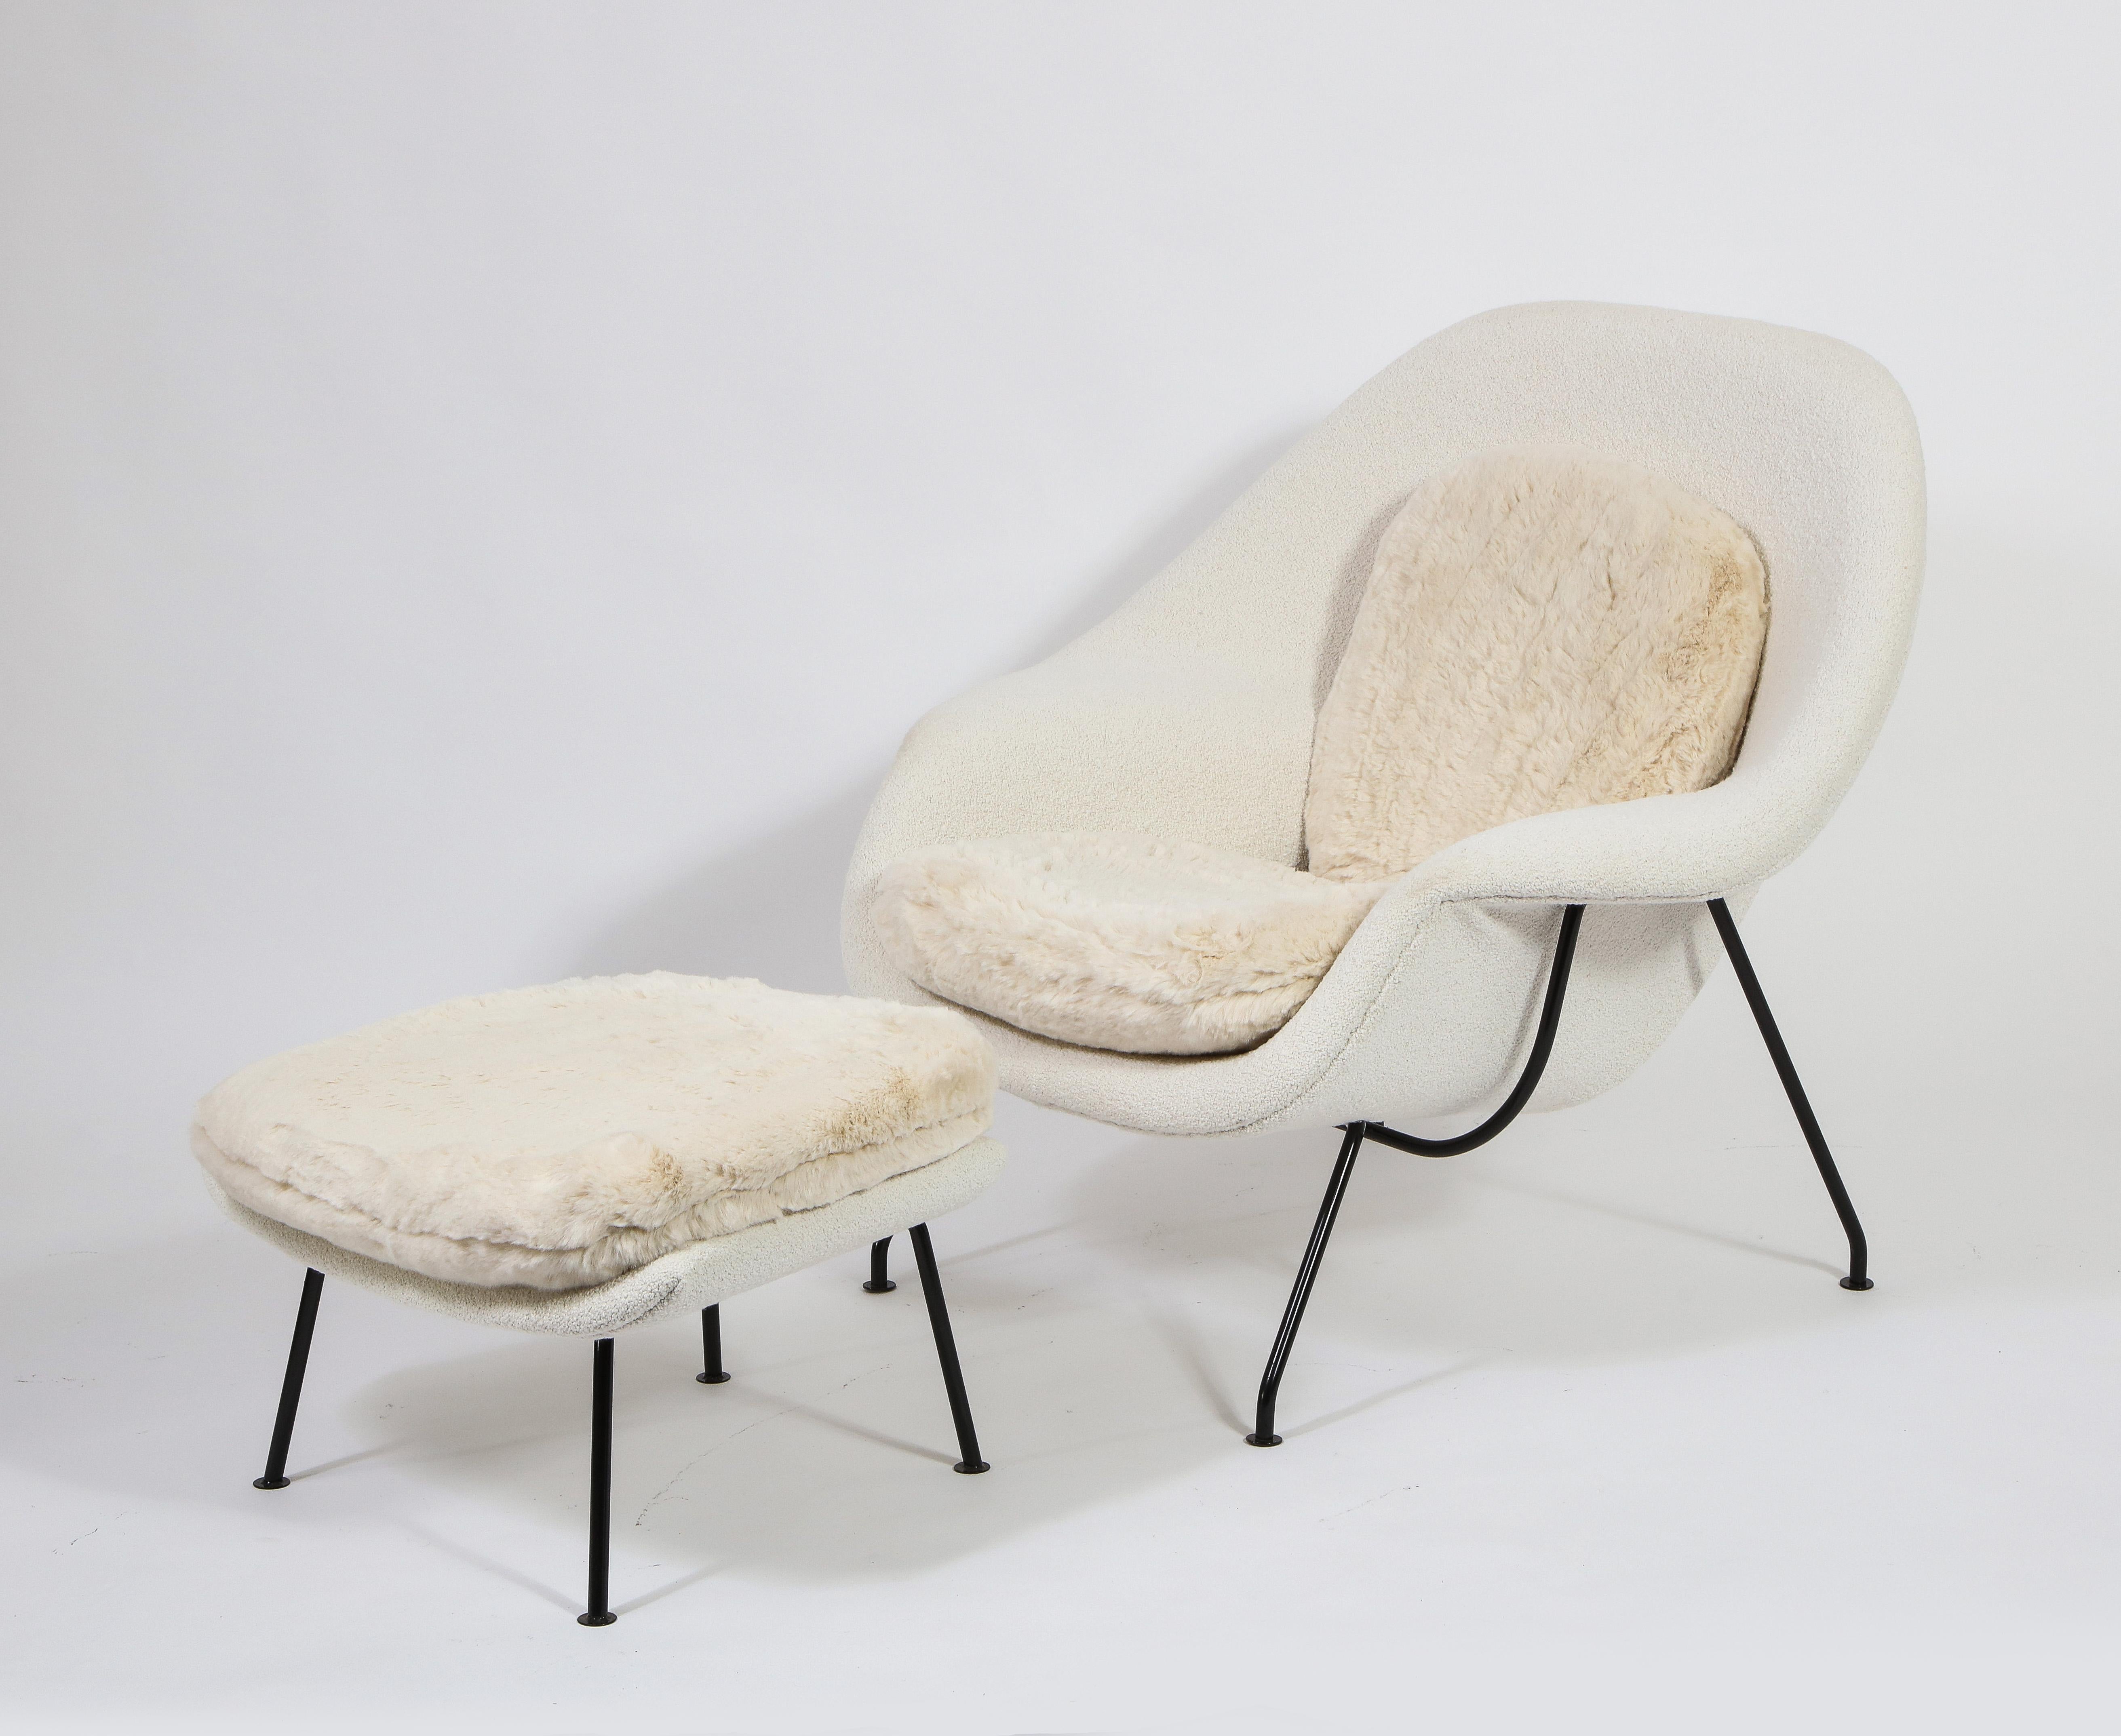 Mid-Century Modern Eero Saarinen for Knoll Pair of Two-Tone Womb Chairs with Ottomans, USA 1955 For Sale